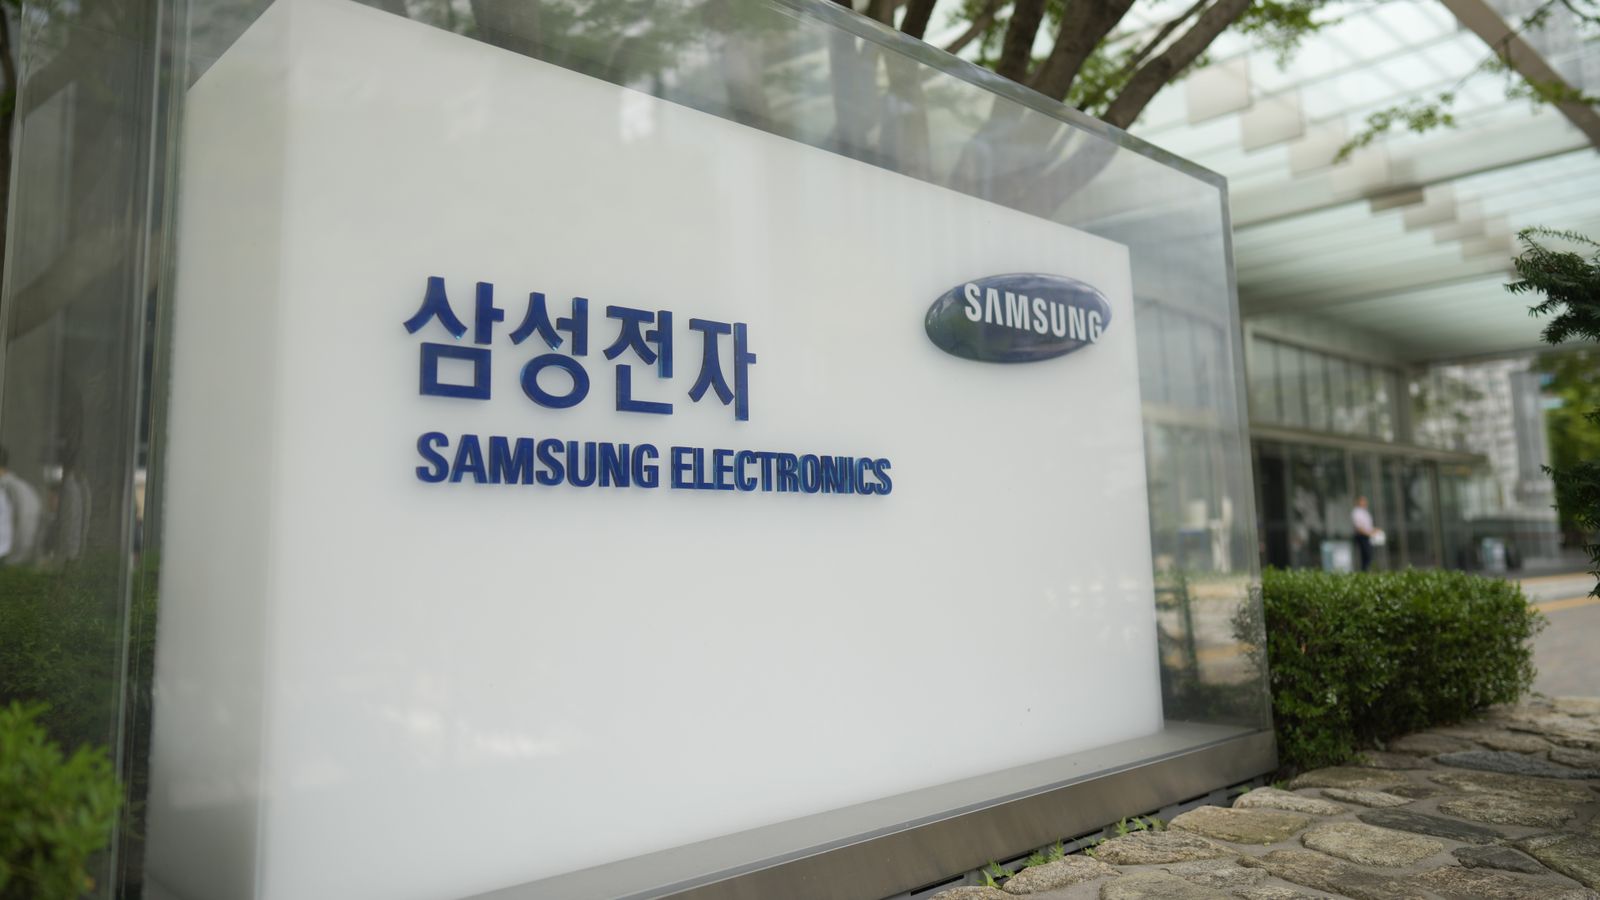 Samsung Electronics workers in South Korea stage first strike in the company’s 55-year history